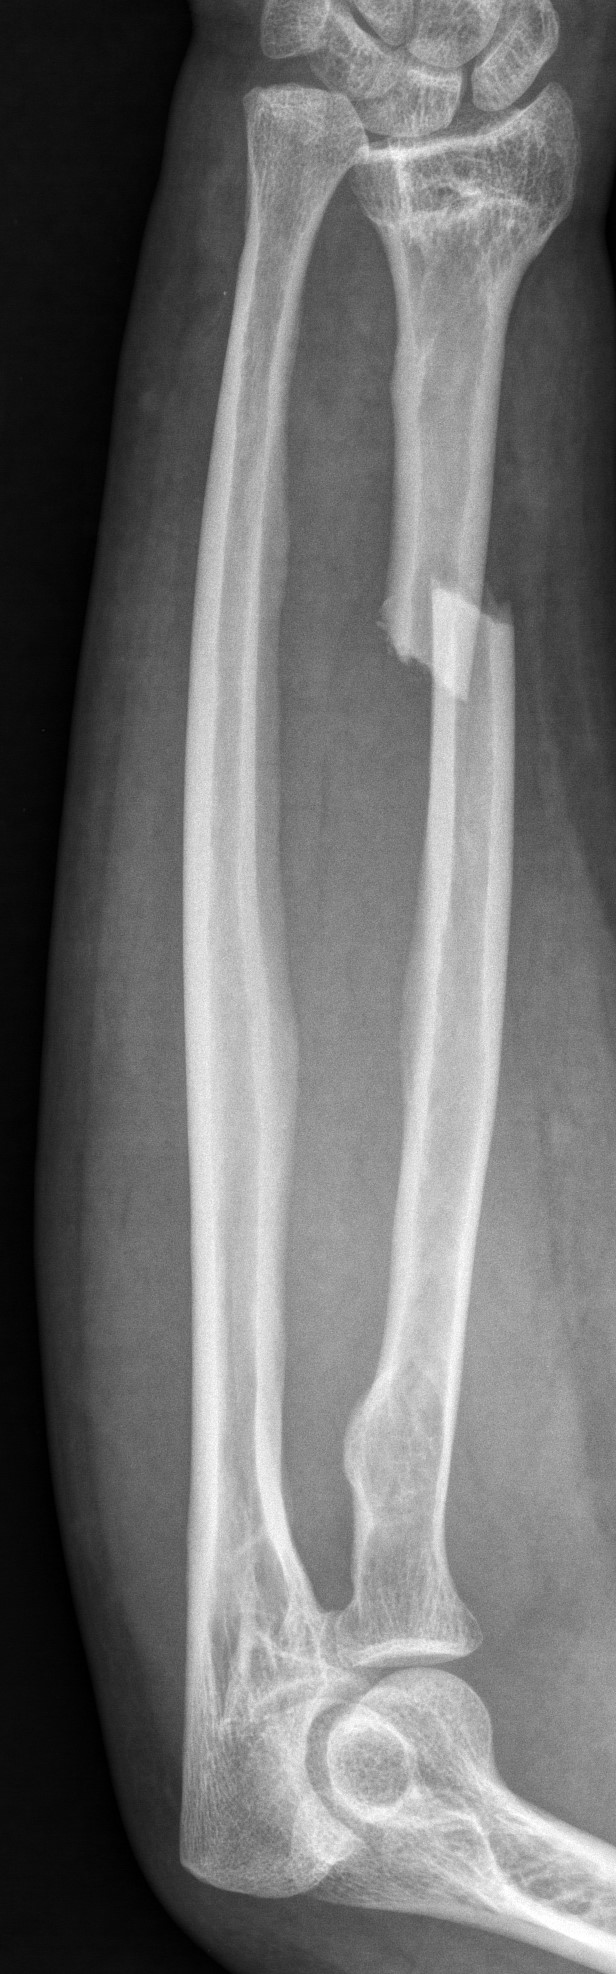 An x-ray of right forearm showing Galeazzi fracture-dislocation